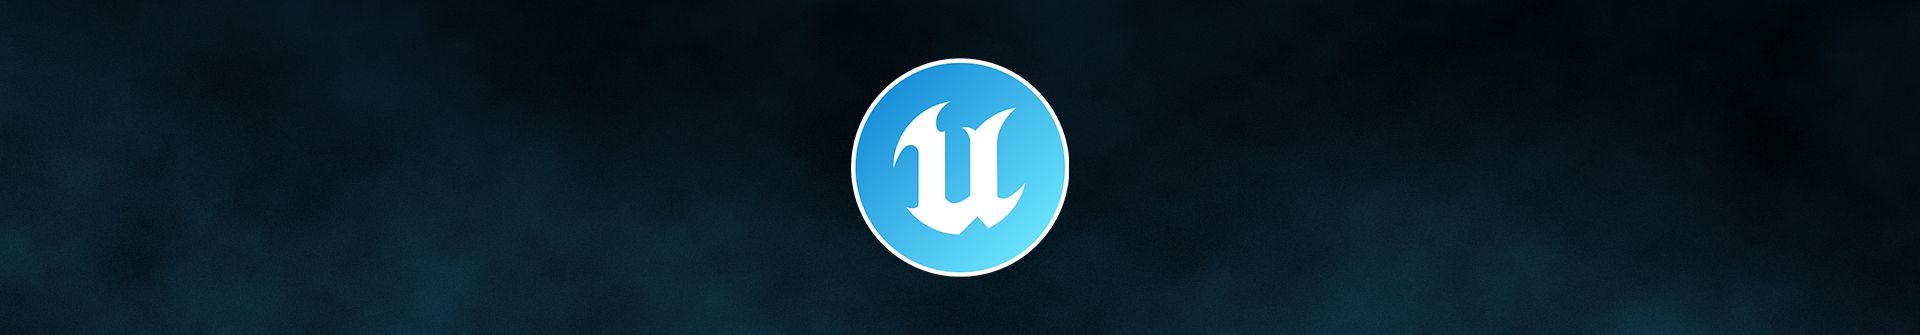 Unreal Editor For Fortnite for Free - Epic Games Store